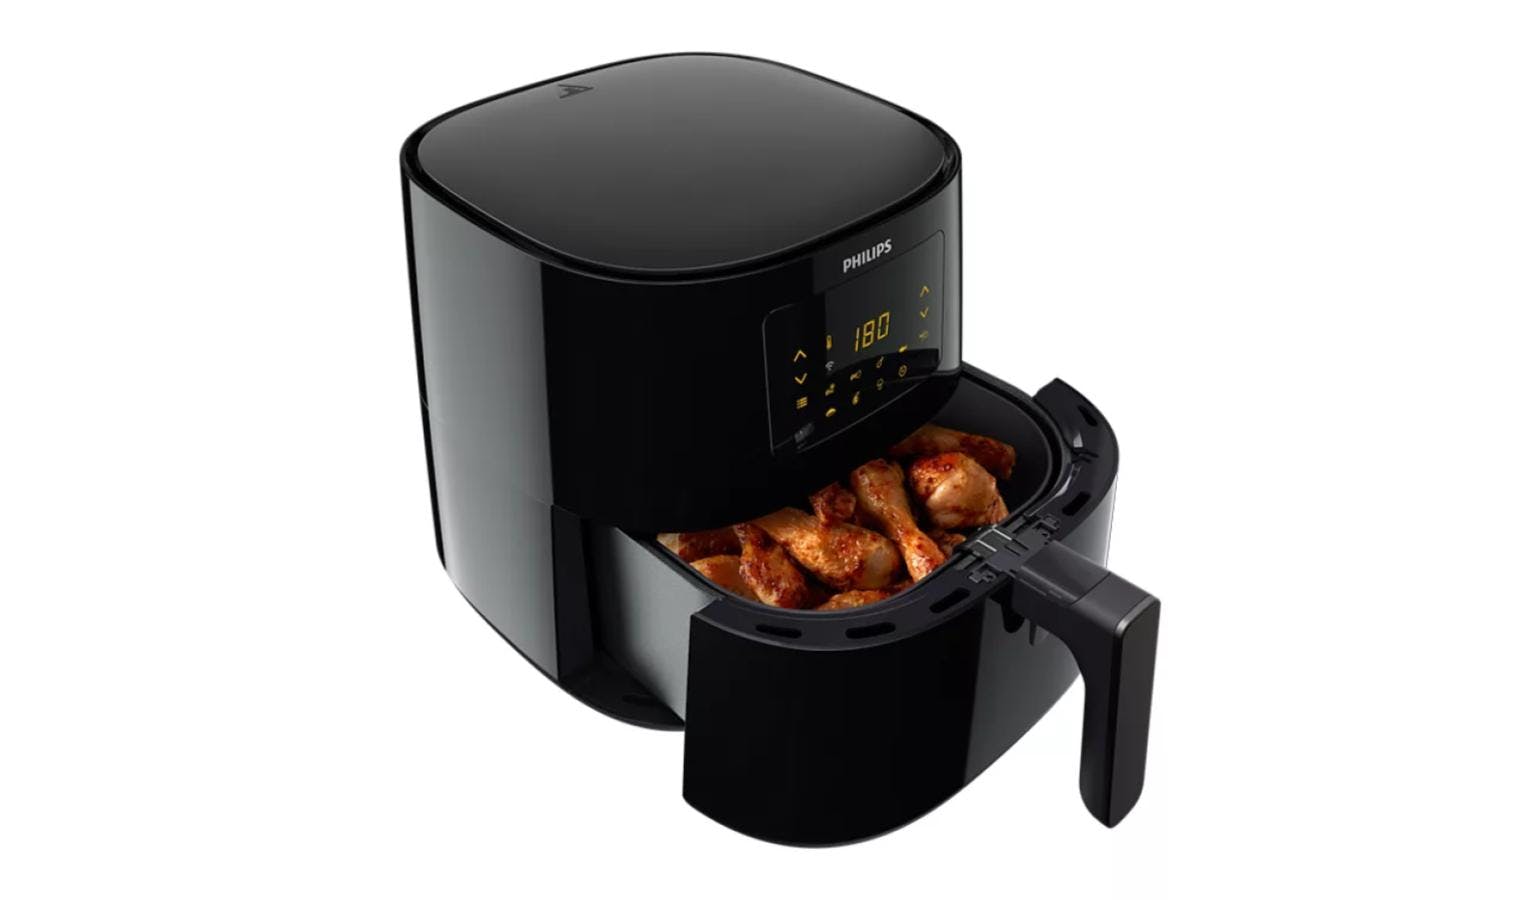 https://hnsgsfp.imgix.net/9/images/detailed/87/philips-essential-connected-digital-airfryer-xl-black-hd9280-90_3.jpg?fit=fill&bg=0FFF&w=1534&h=900&auto=format,compress